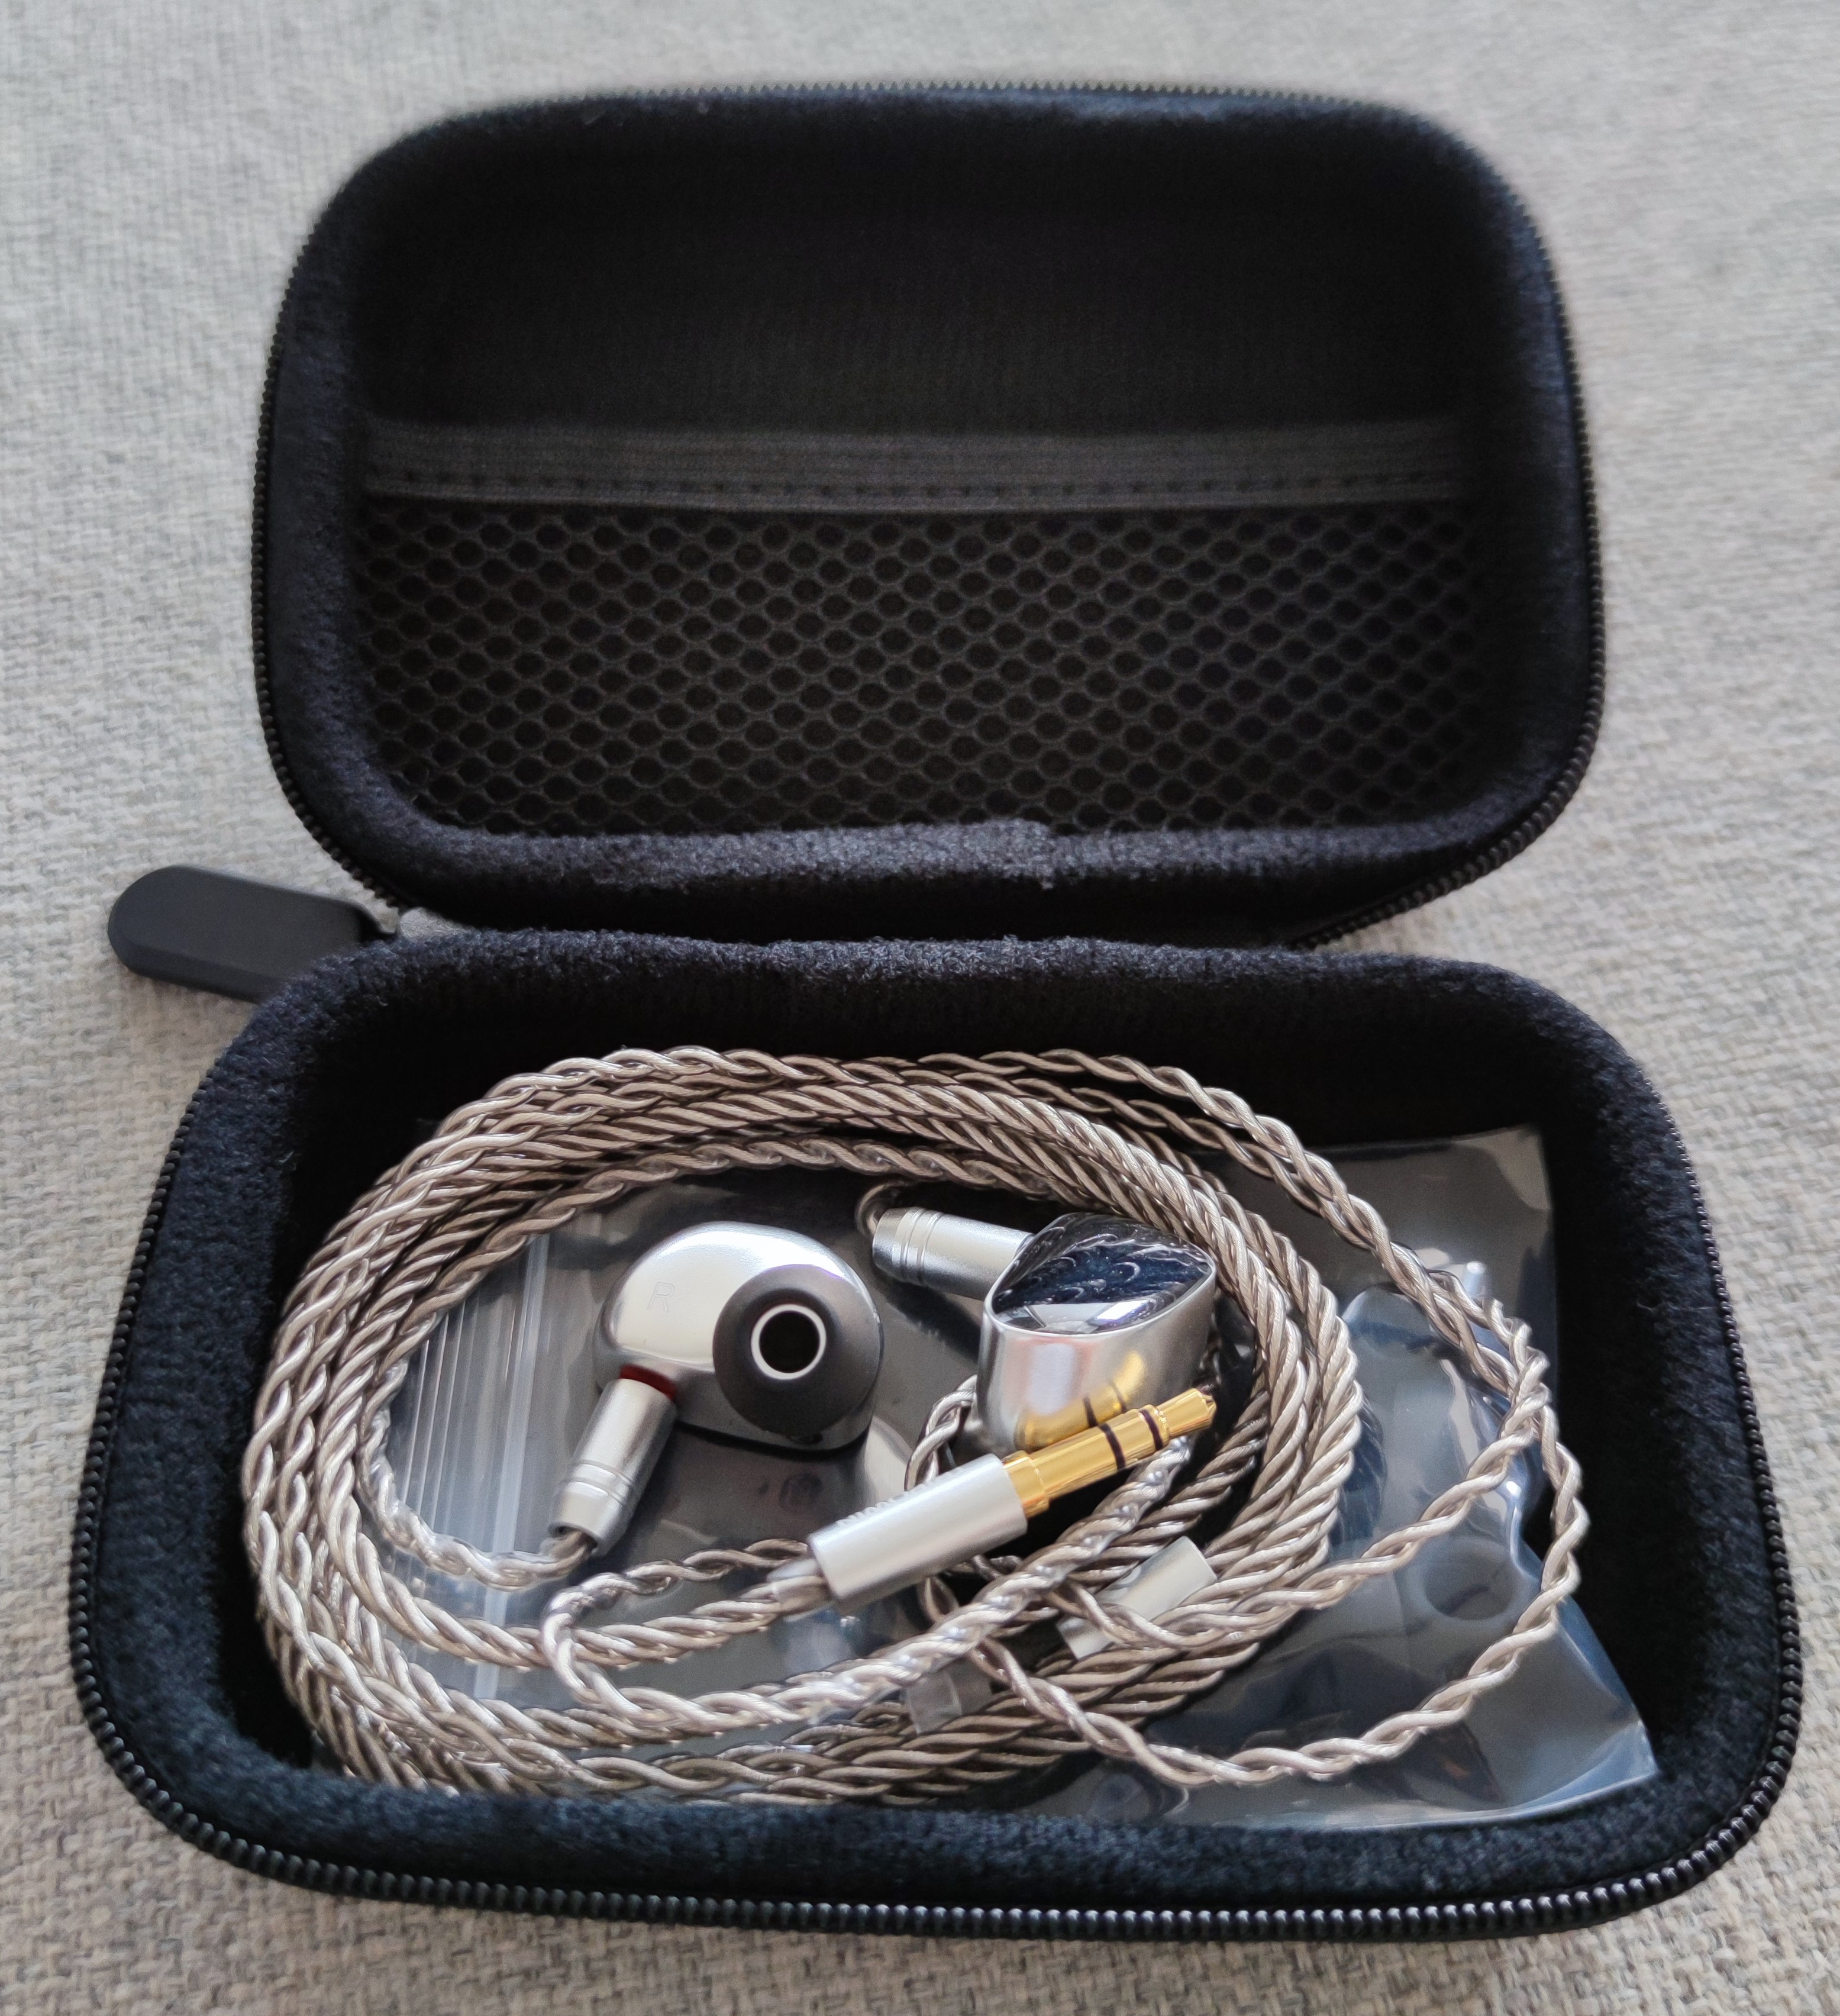 🔶 Tripowin X HBB Olina - [Official] IEMs / Other - HifiGuides Forums